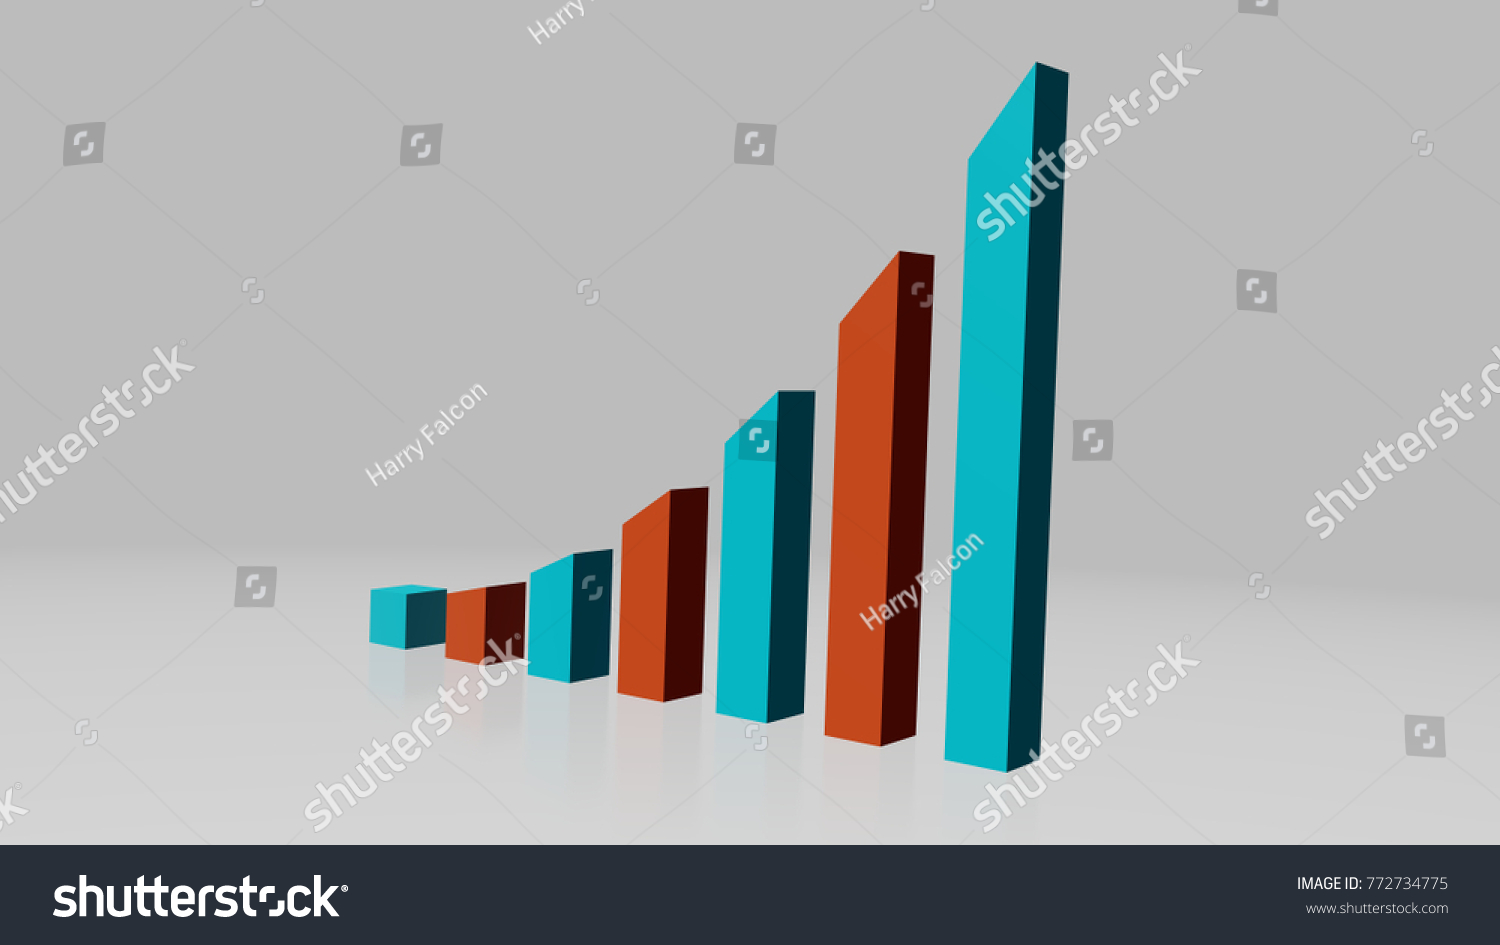 Business graph showing upwards trend with red and blue bars, foreshortening from the right. #772734775